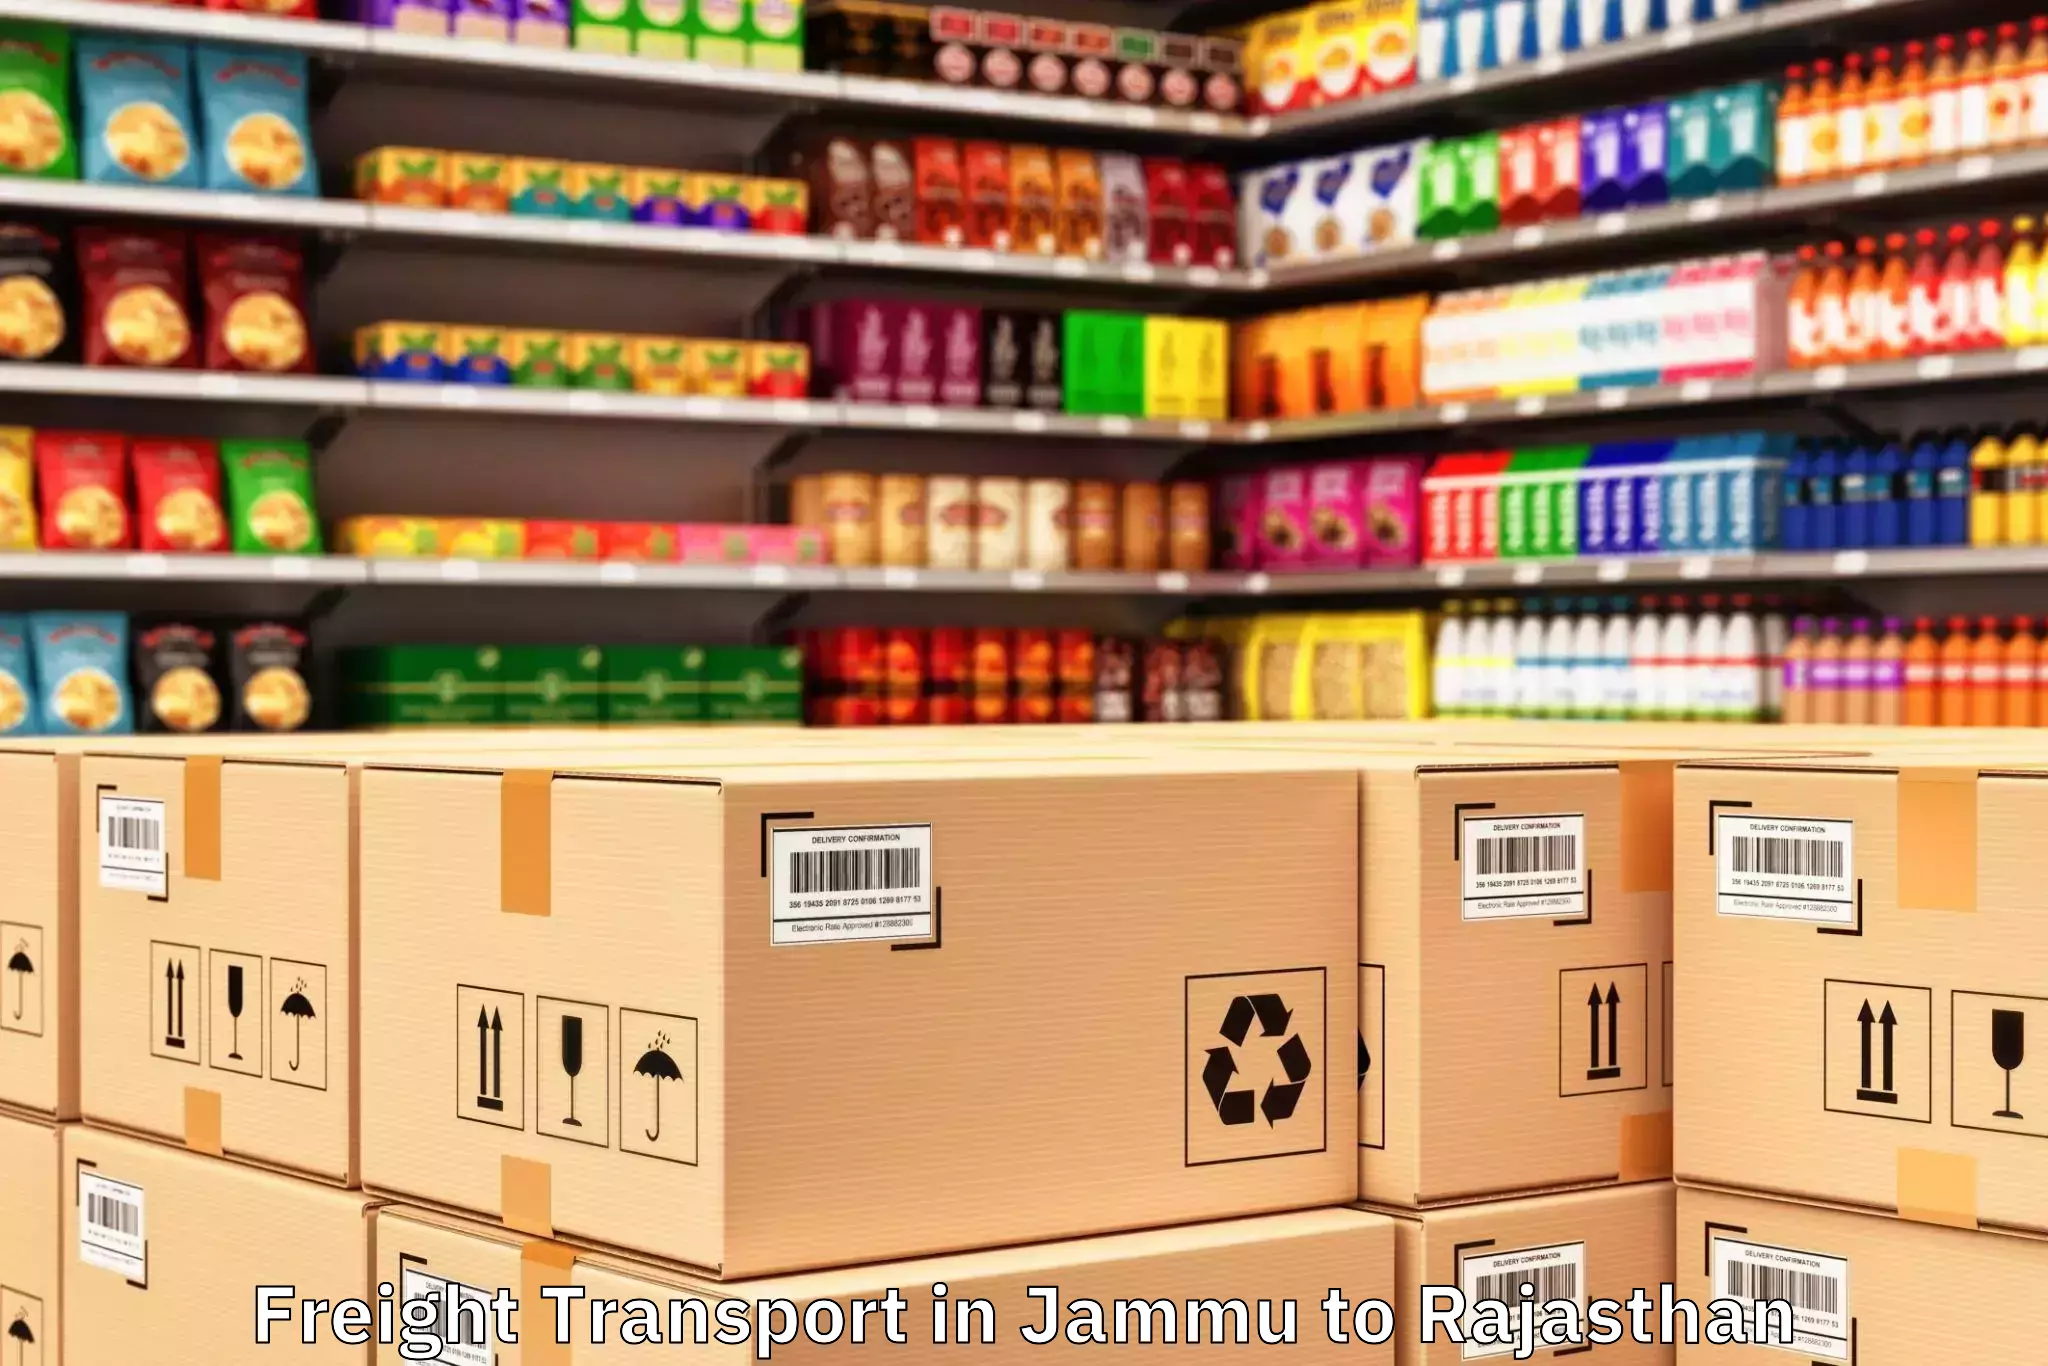 Quality Jammu to Rajasthan Freight Transport